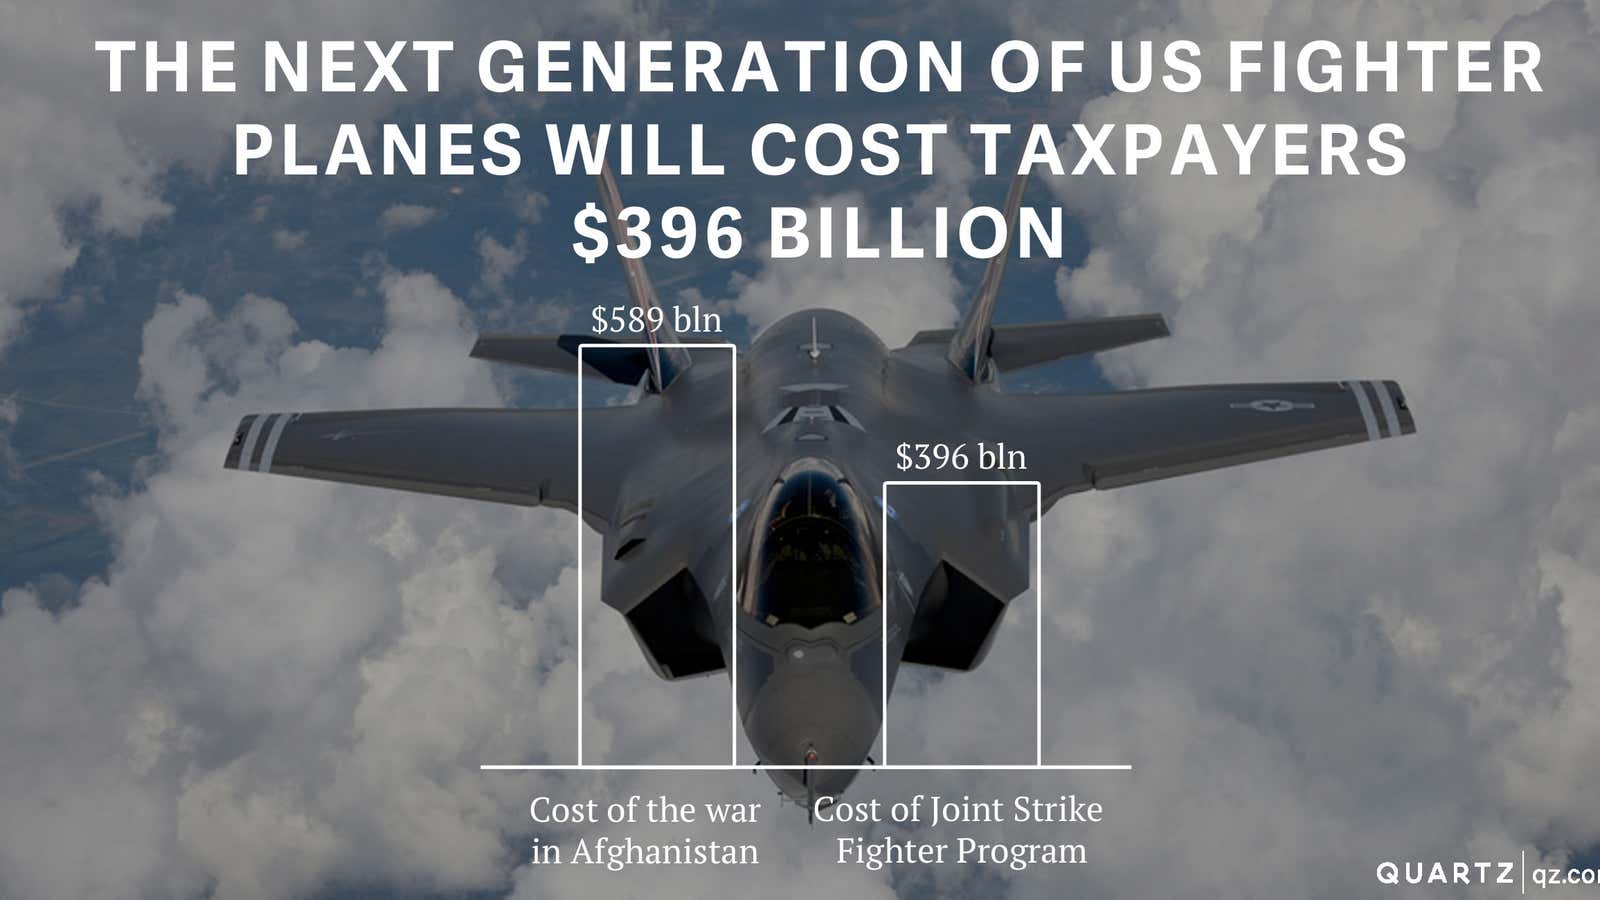 The US Joint Strike Fighter program is projected to cost two-thirds of the war in Afghanistan